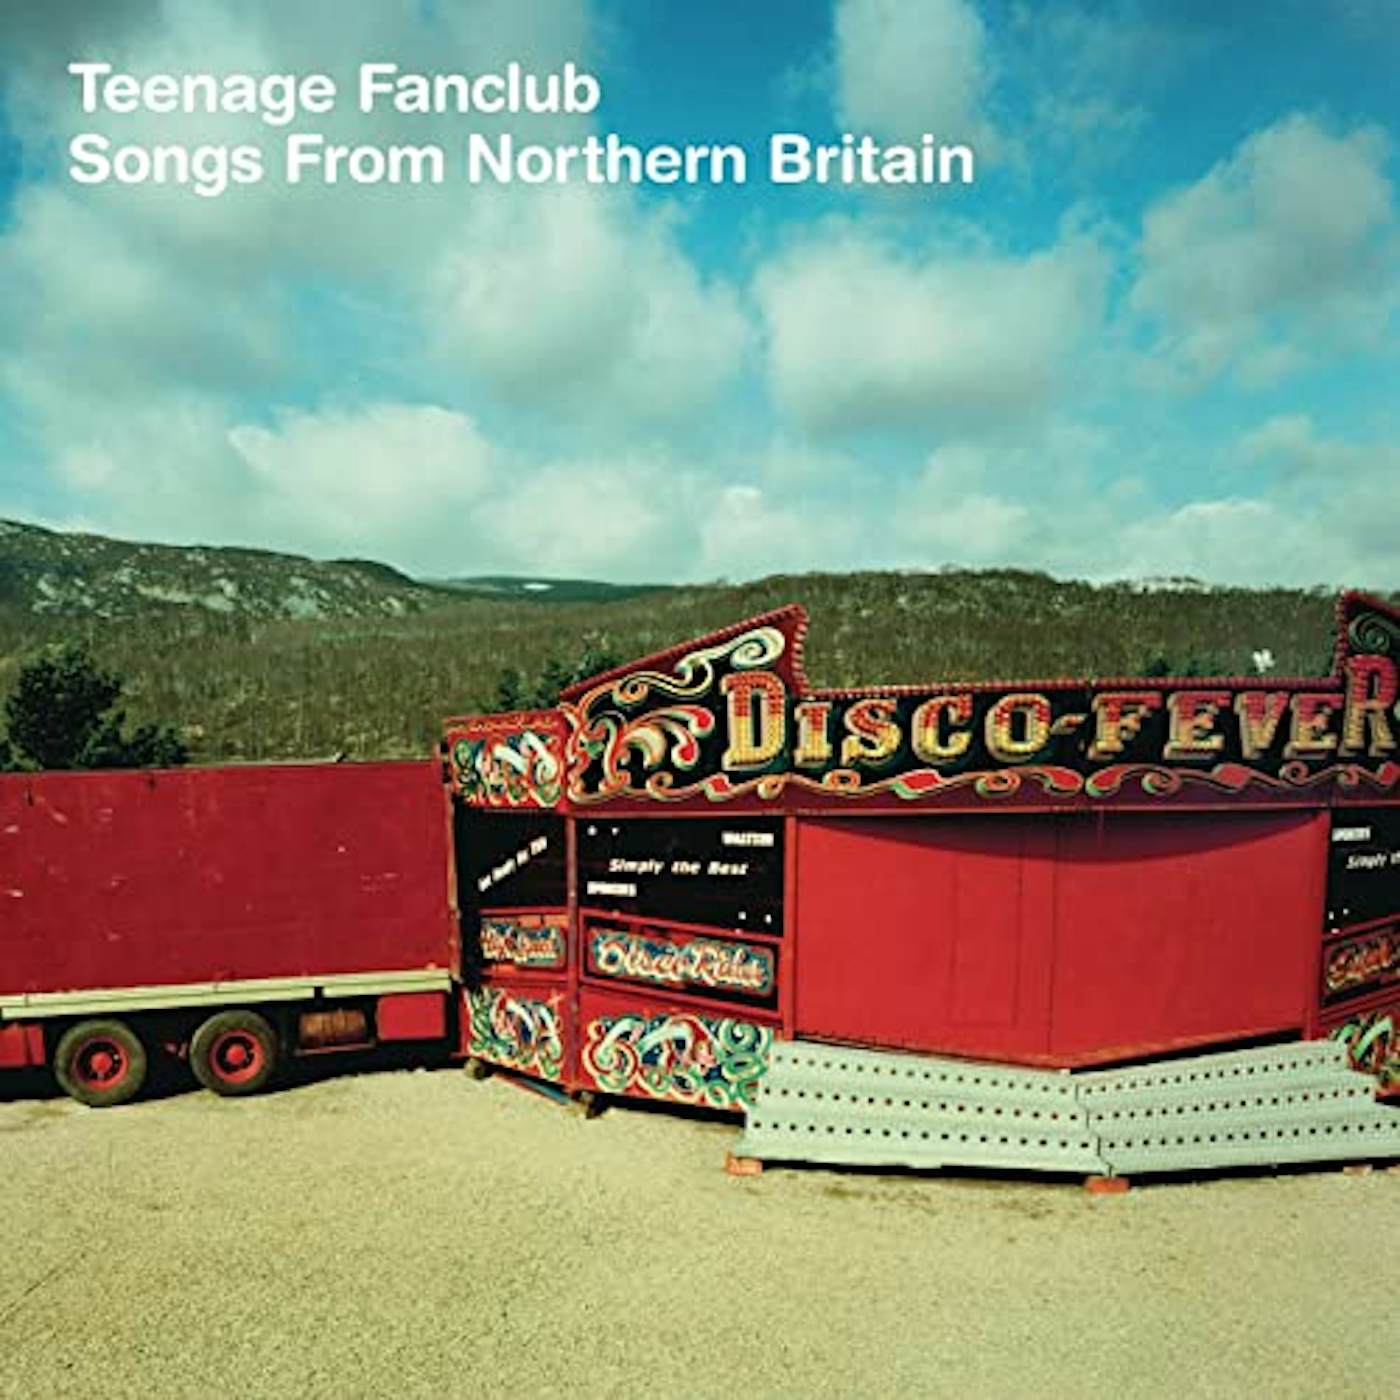 Teenage Fanclub Songs From Northern Britain Vinyl Record